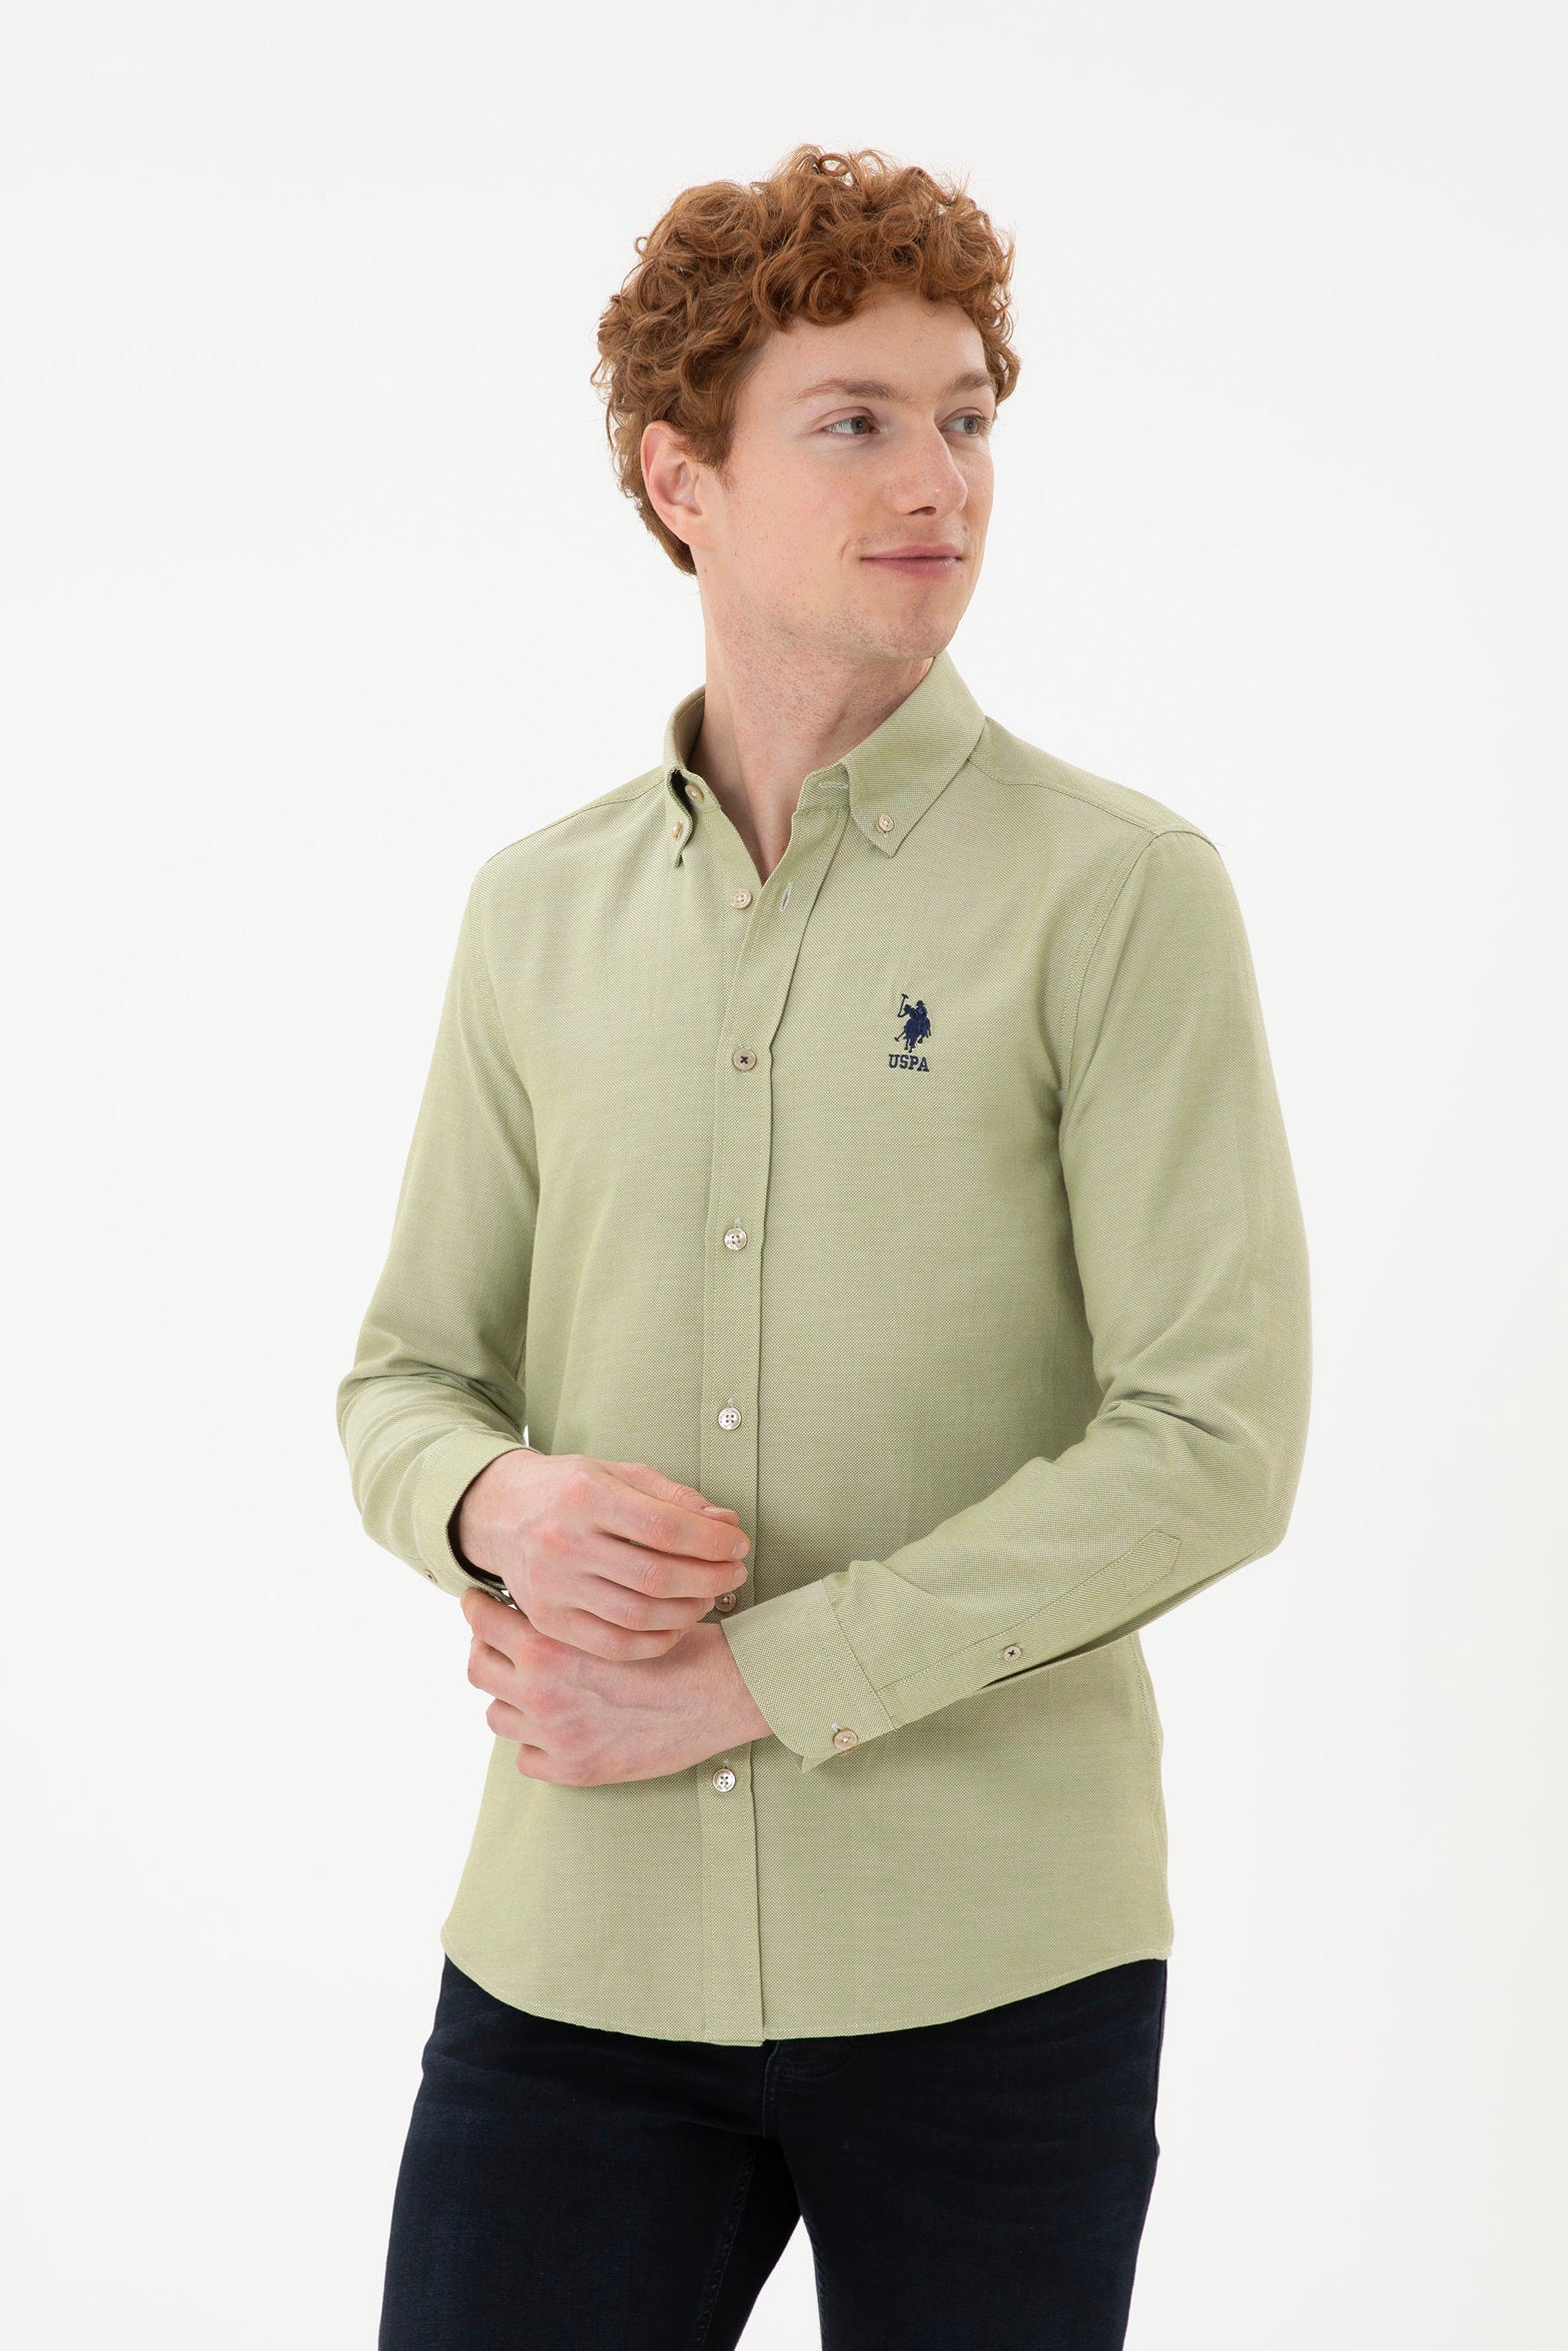 Button Down Shirt With Logo_G081GL0040 1886621_VR183_03